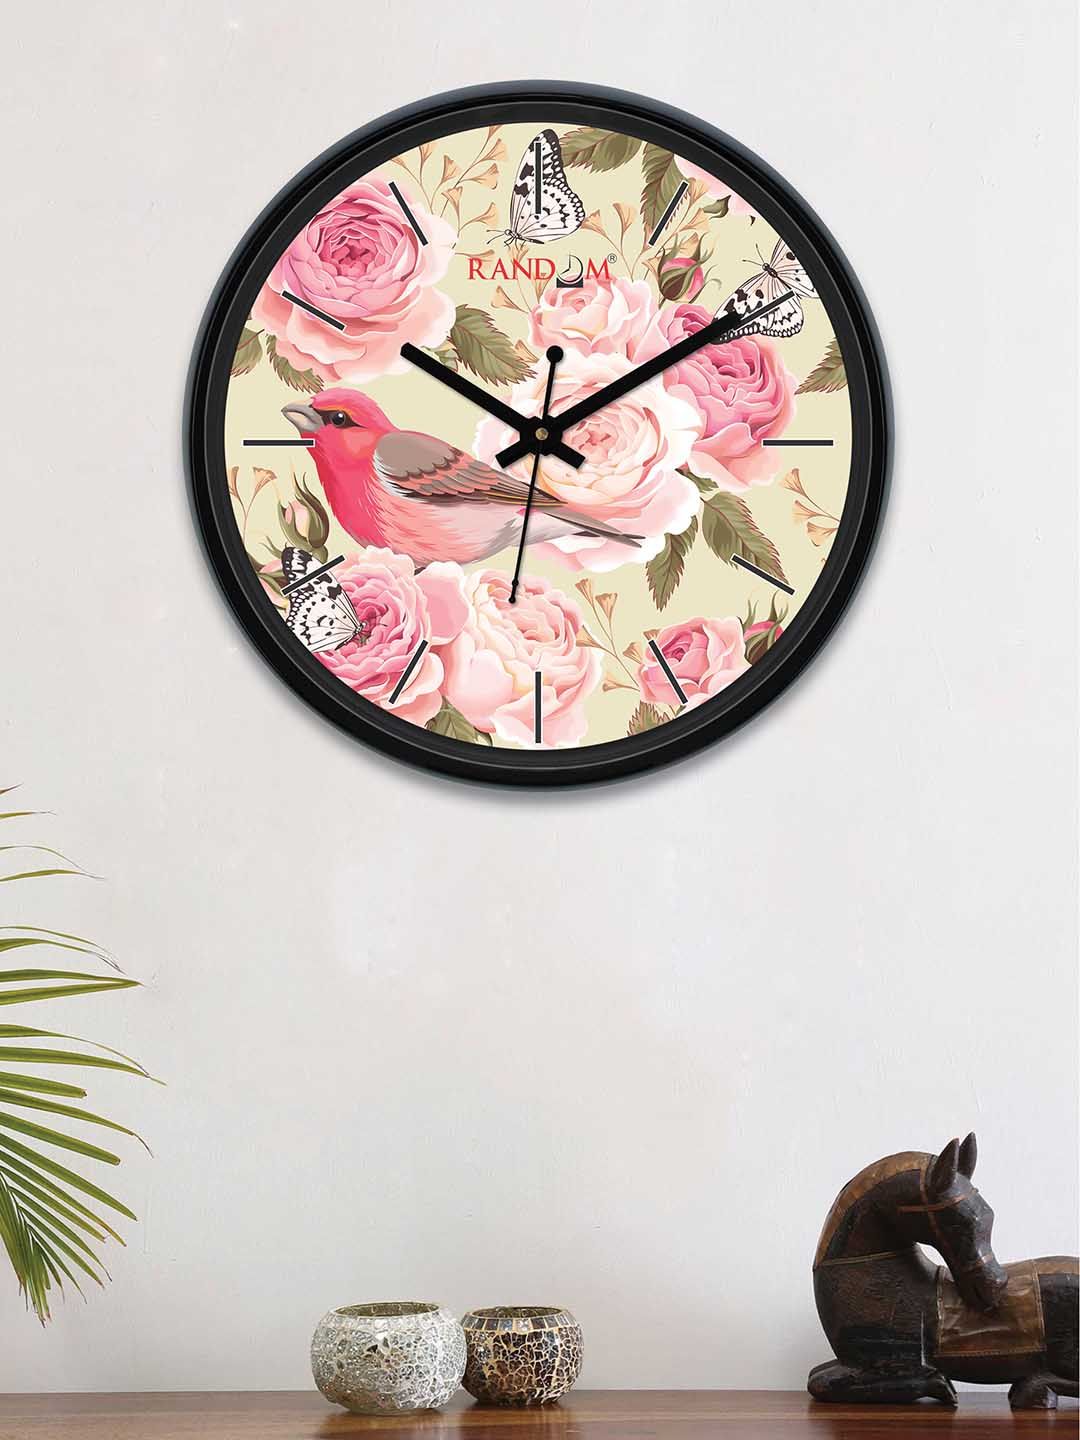 RANDOM Cream-Coloured & Pink Round Printed 30 cm Analogue Wall Clock Price in India